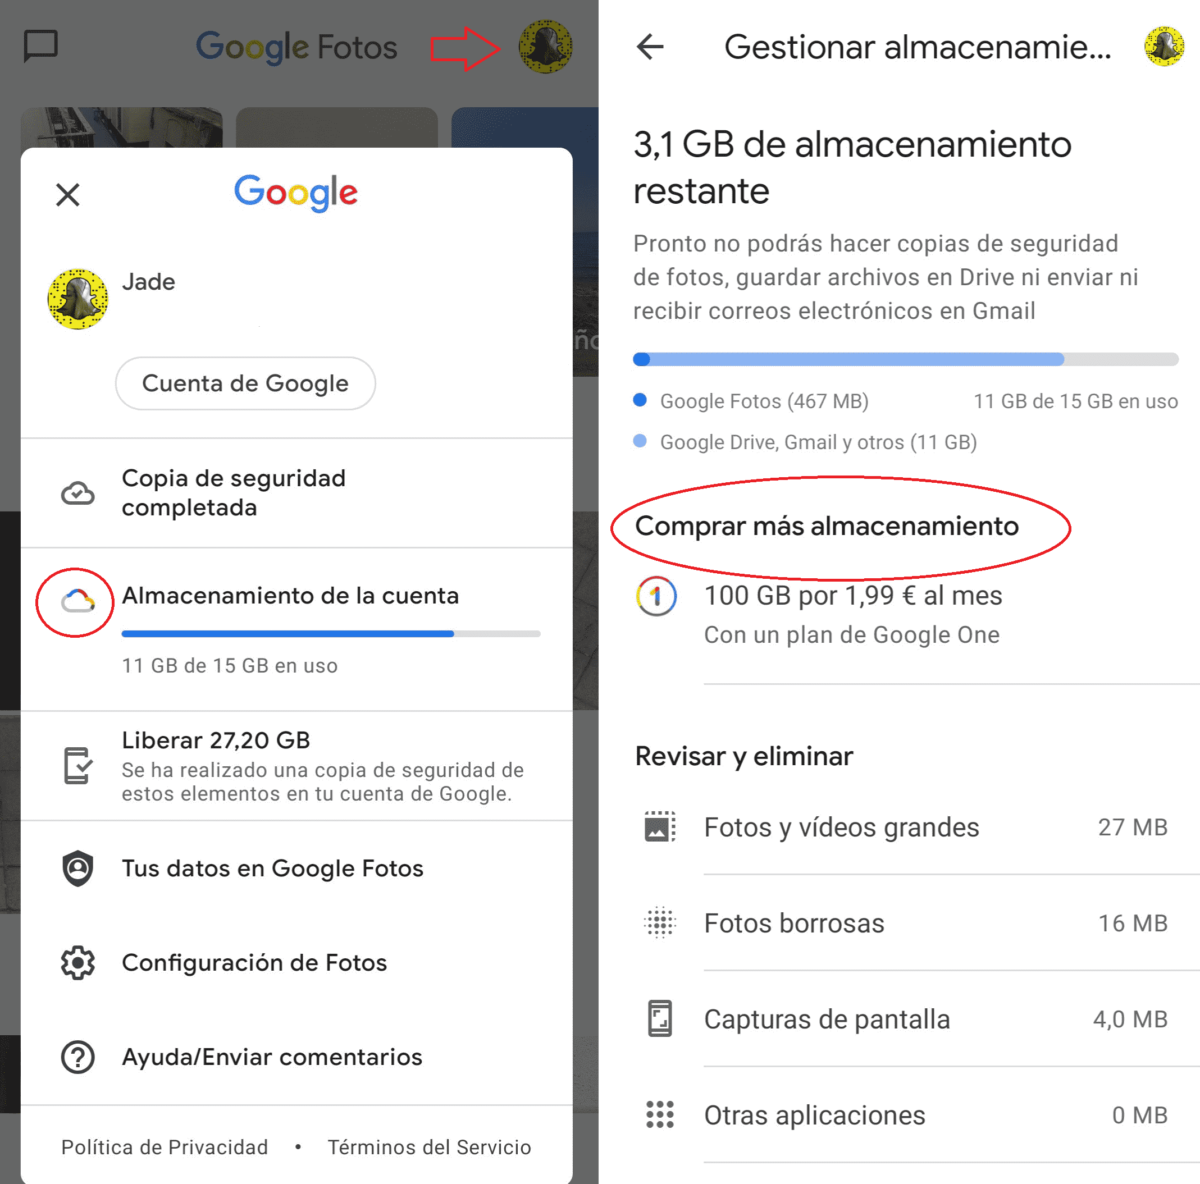 how much space is left in google photos